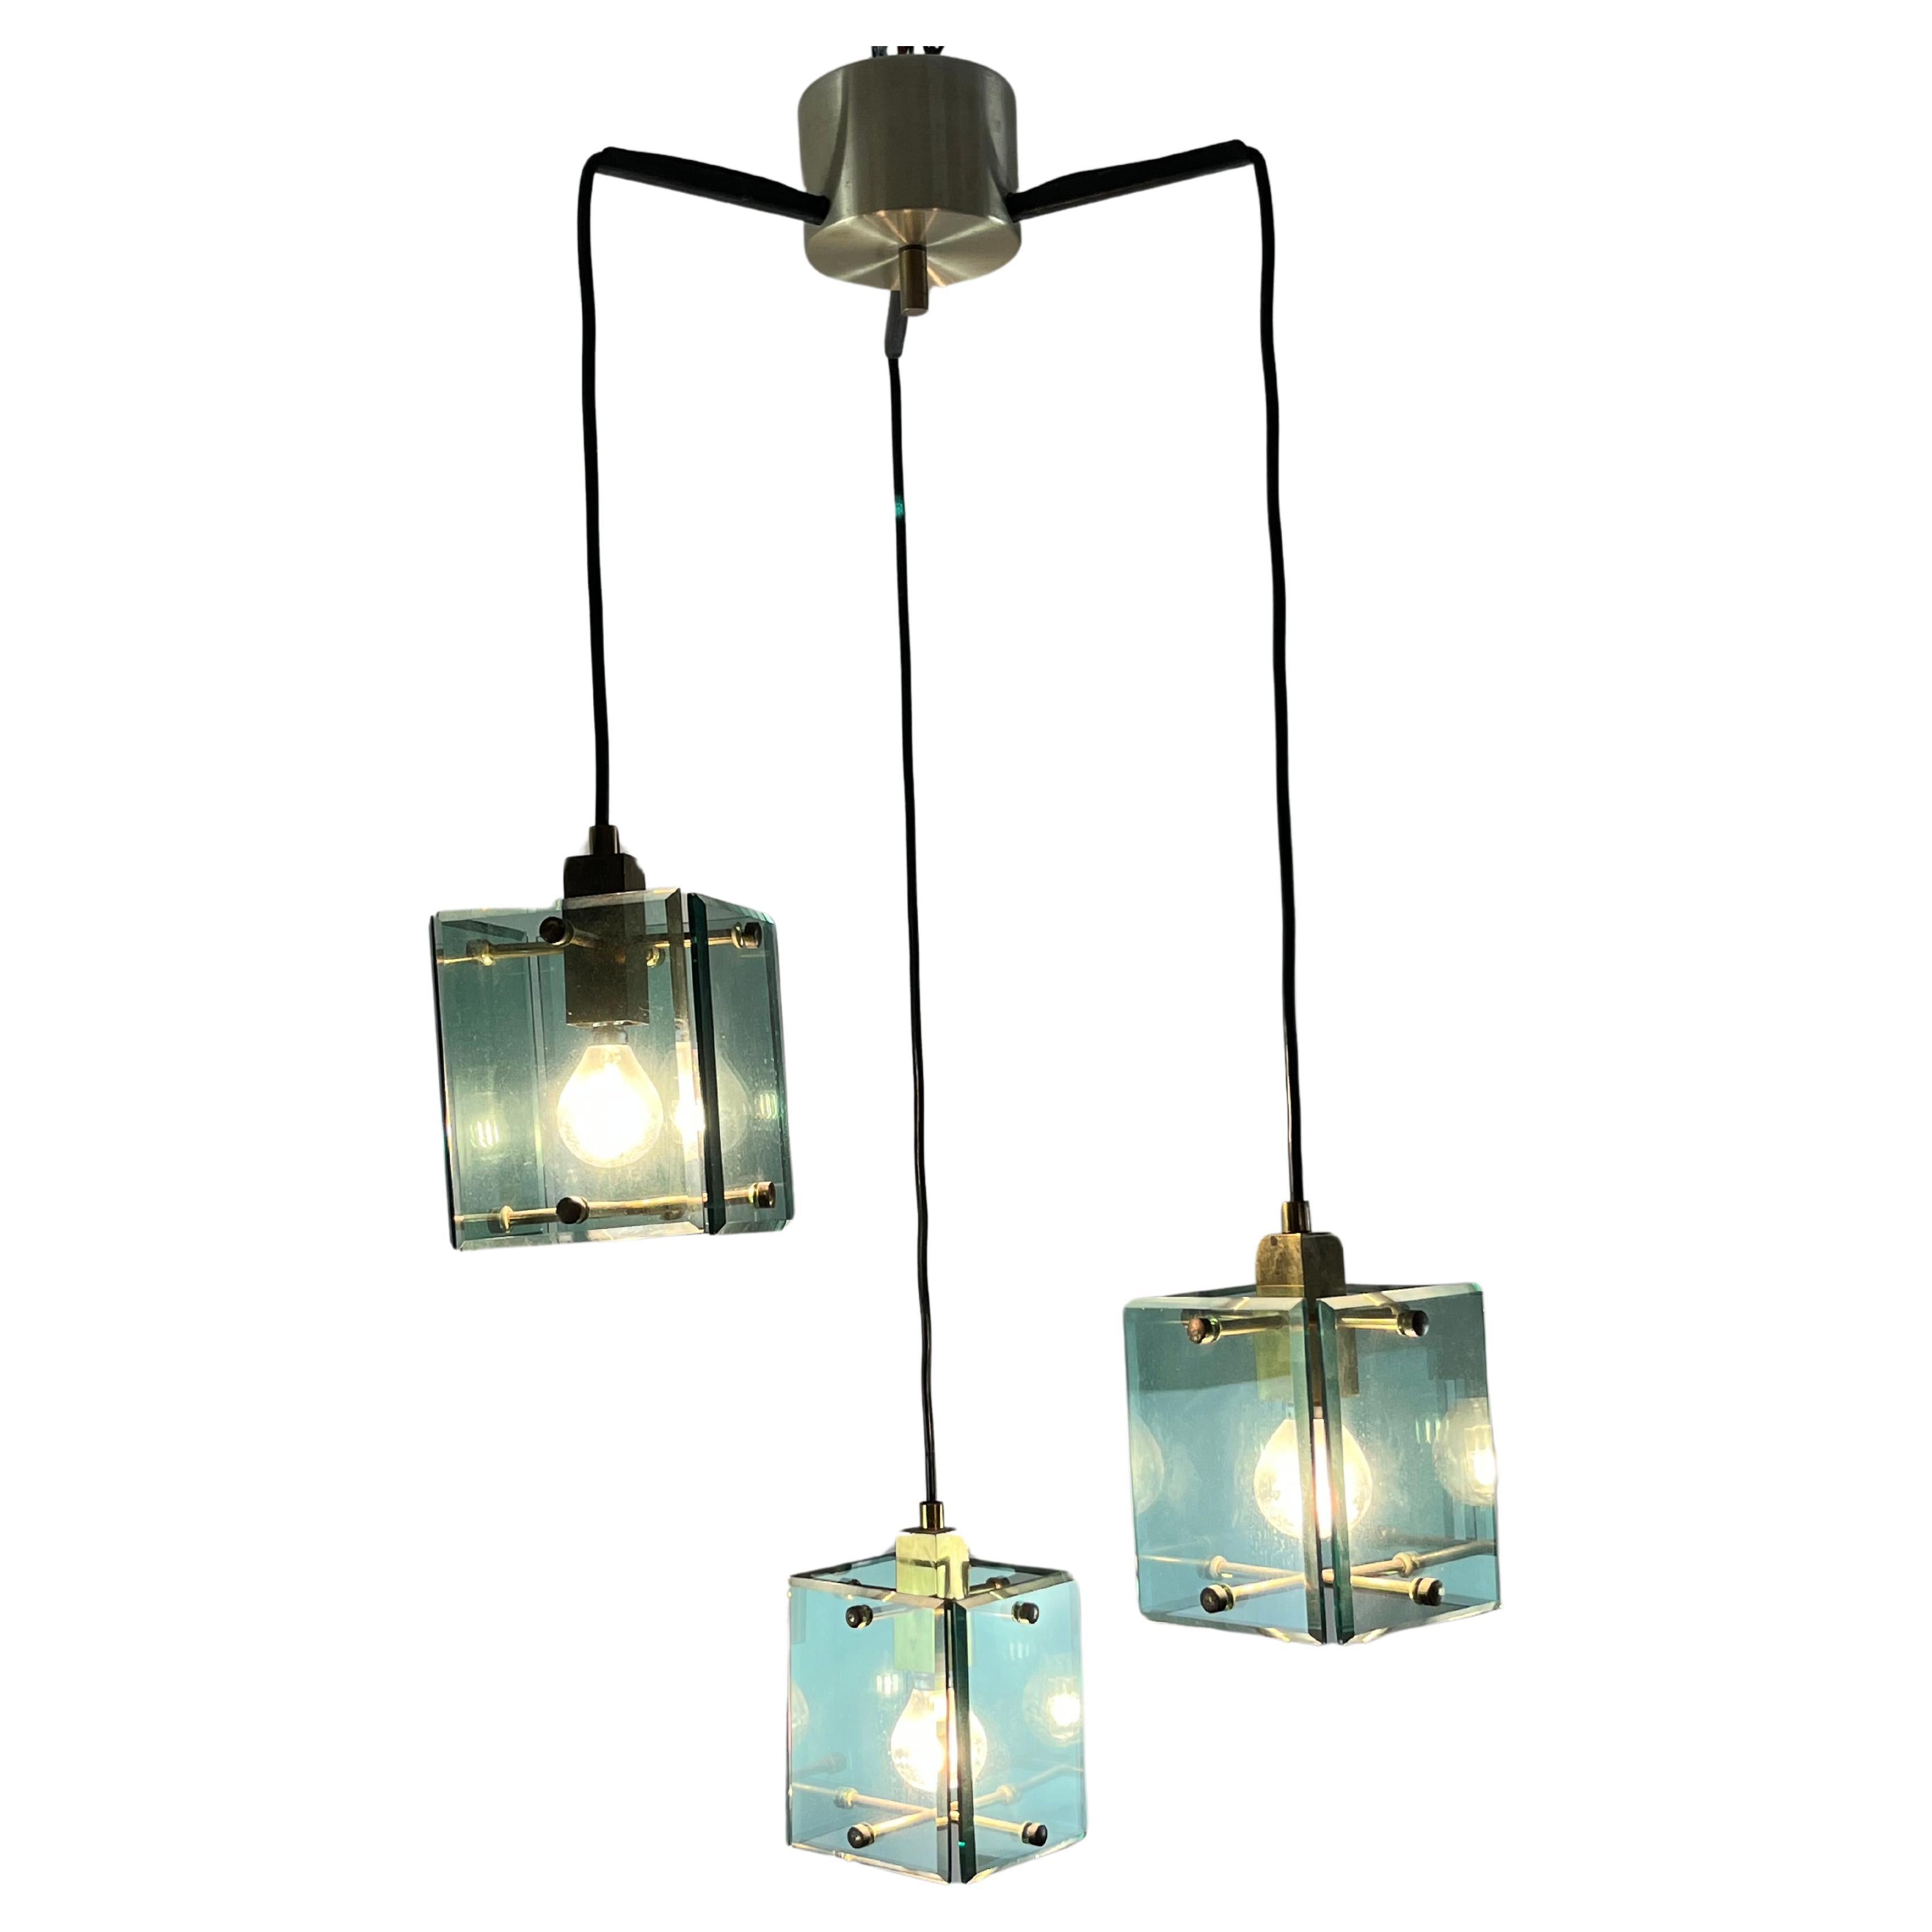 Vintage 3-light  pendant chandelier, attributed to Fontana Arte, 1960s
Made of brass and colored Murano glass, it is intact and functional. Found in a noble apartment.